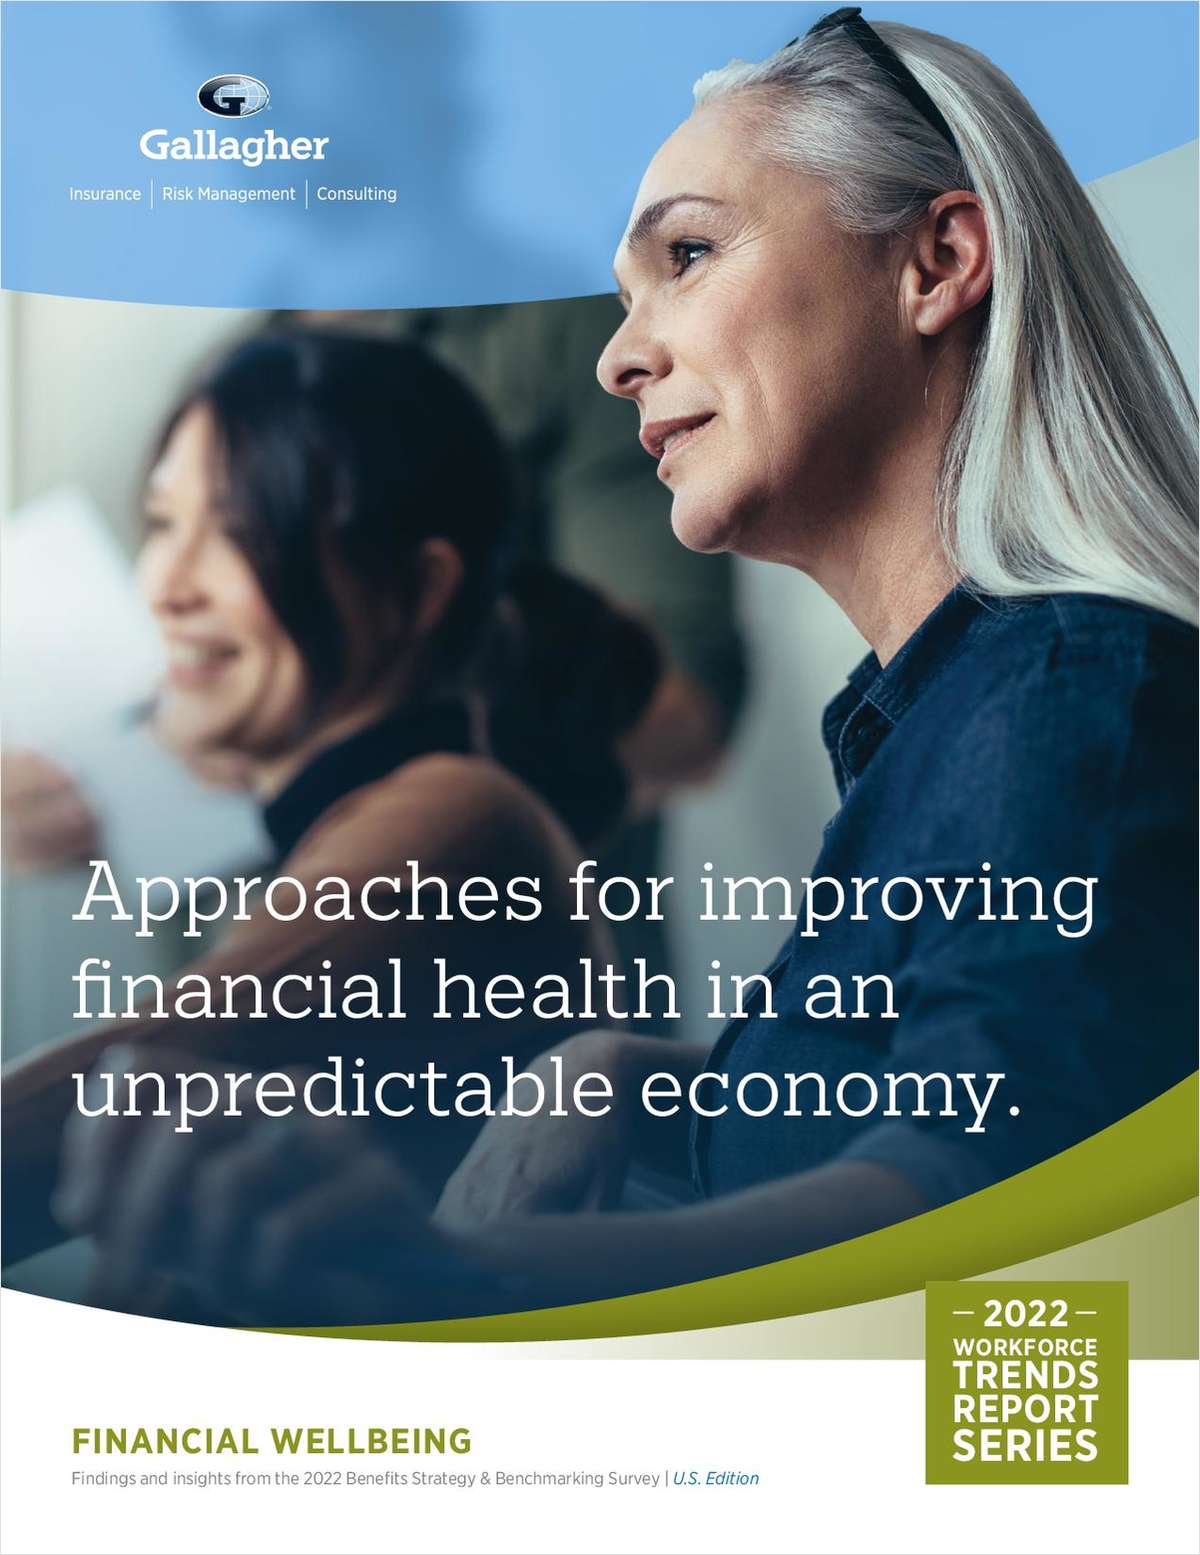 Approaches for improving financial wellbeing in an unpredictable economy